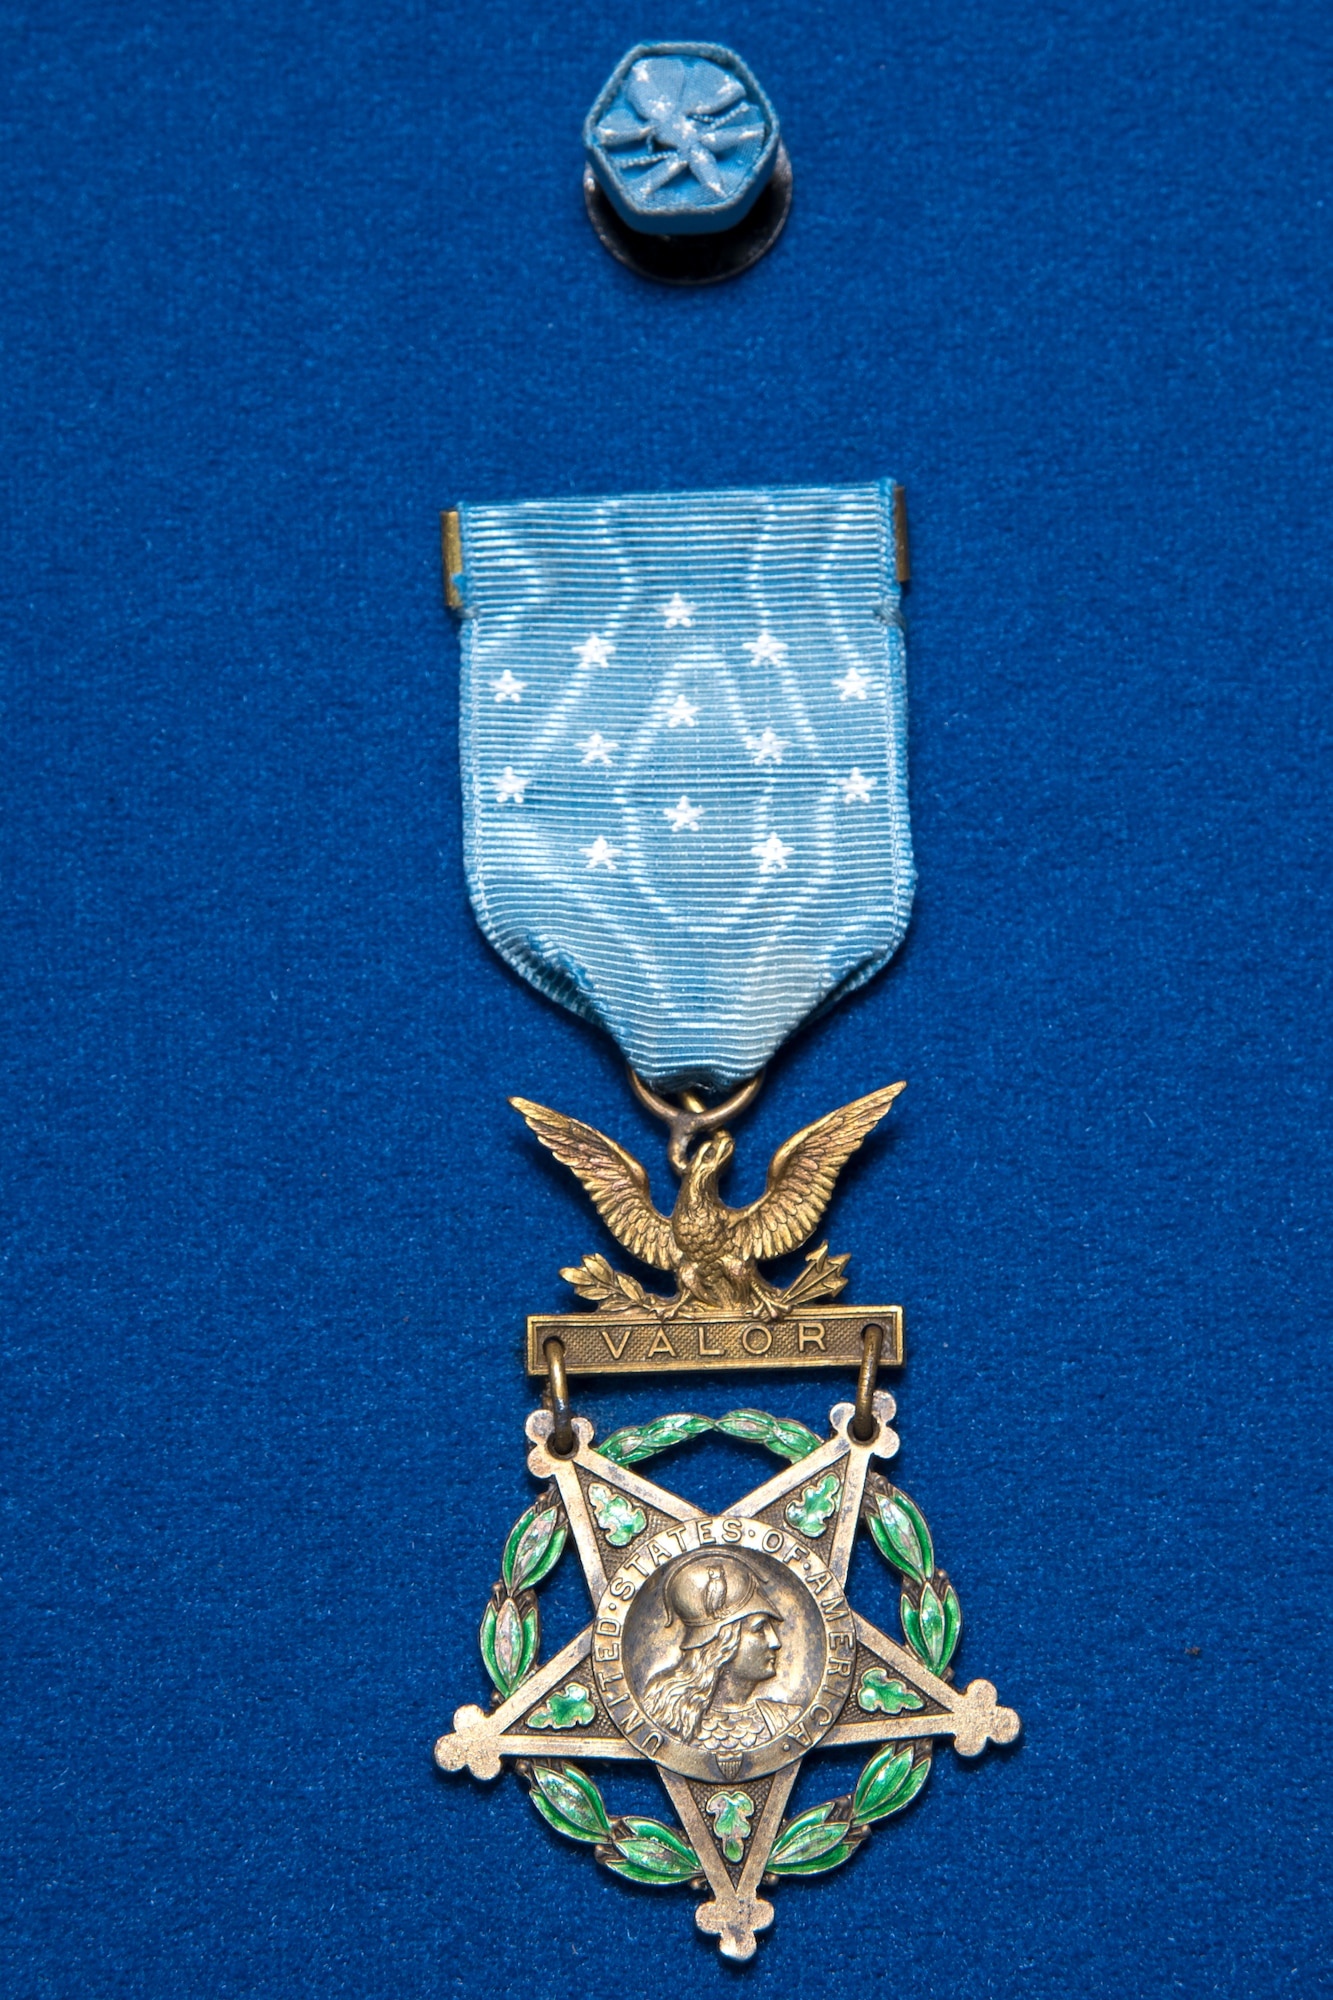 WWI pilot Lt. Frank Luke Jr. Medal of Honor on display in the Early Years Gallery at the National Museum of the U.S. Air Force. (U.S. Air Force photo by Ken LaRock)